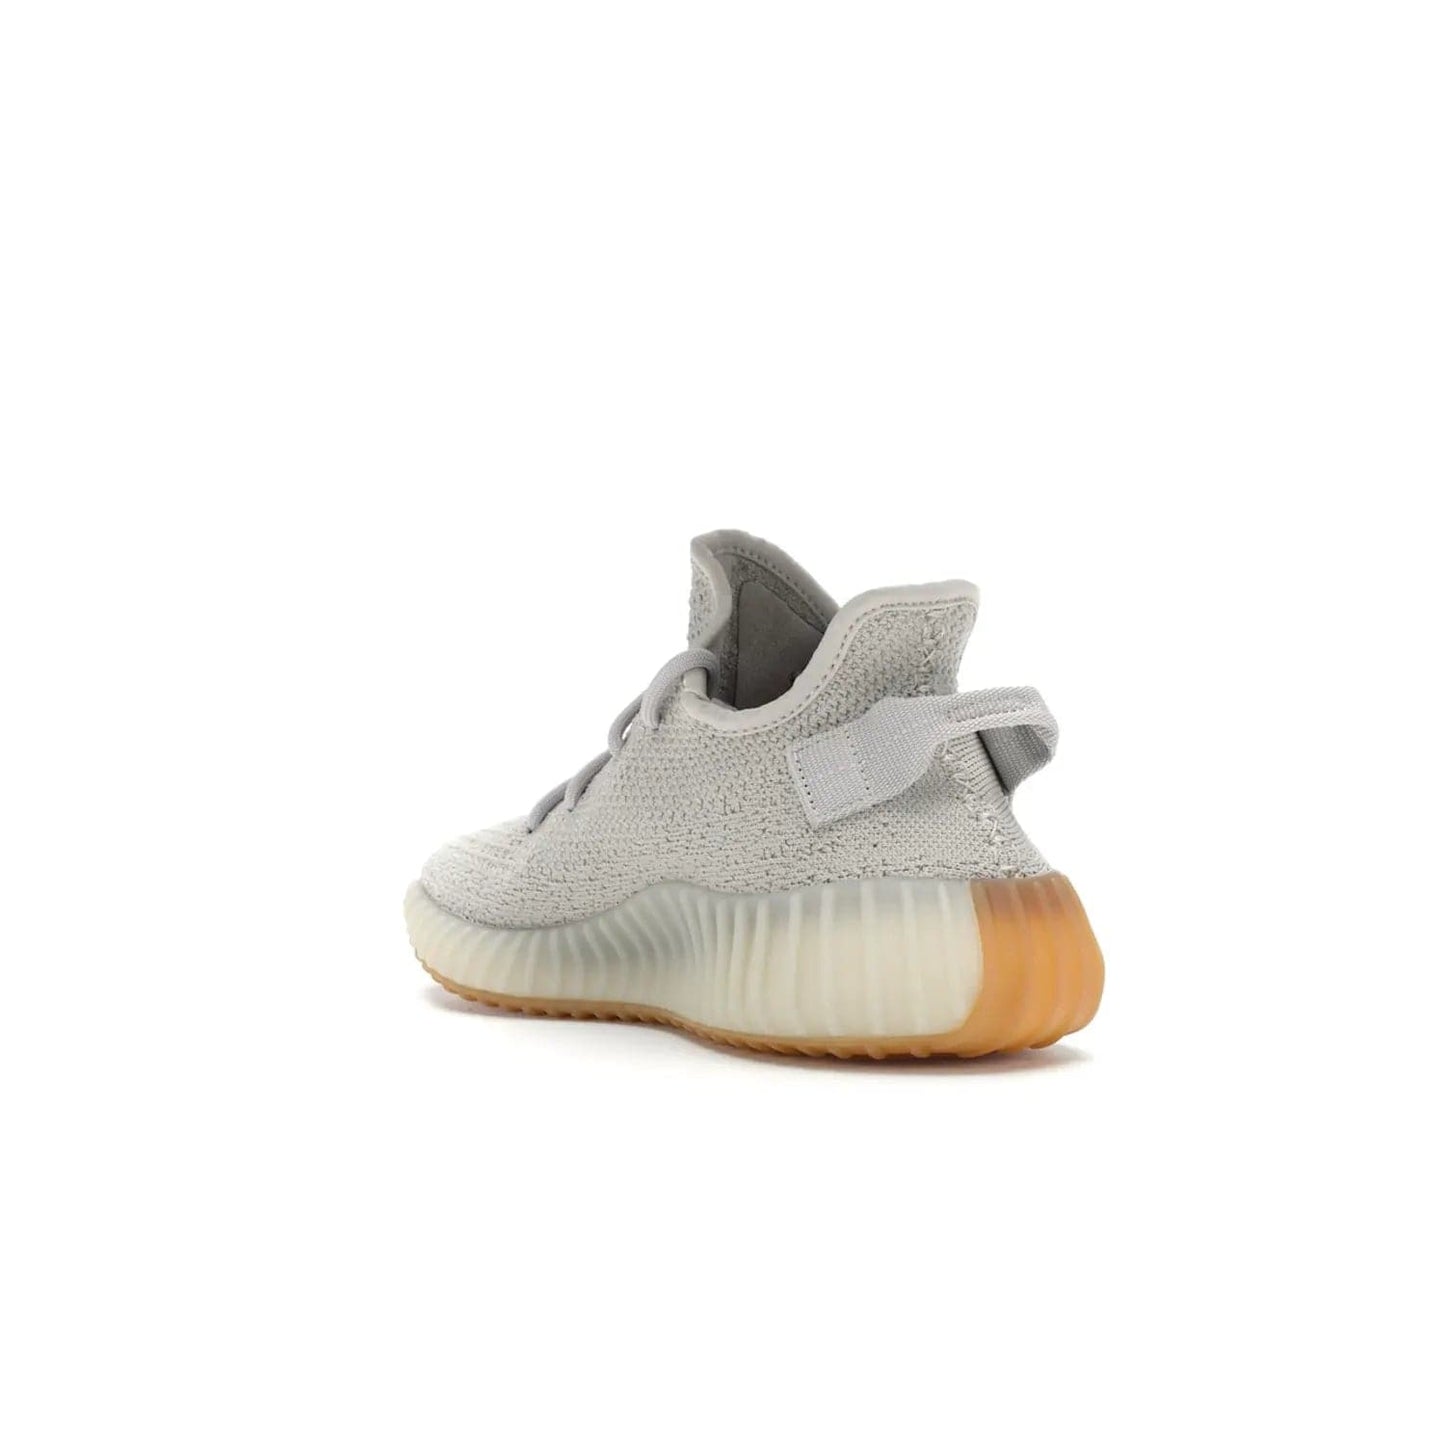 adidas Yeezy Boost 350 V2 Sesame - Image 25 - Only at www.BallersClubKickz.com - Introducing the adidas Yeezy Boost 350 V2 Sesame. Featuring a sesame upper, midsole and gum sole for a sleek silhouette. Cop the stylish sneaker released in November 2018.